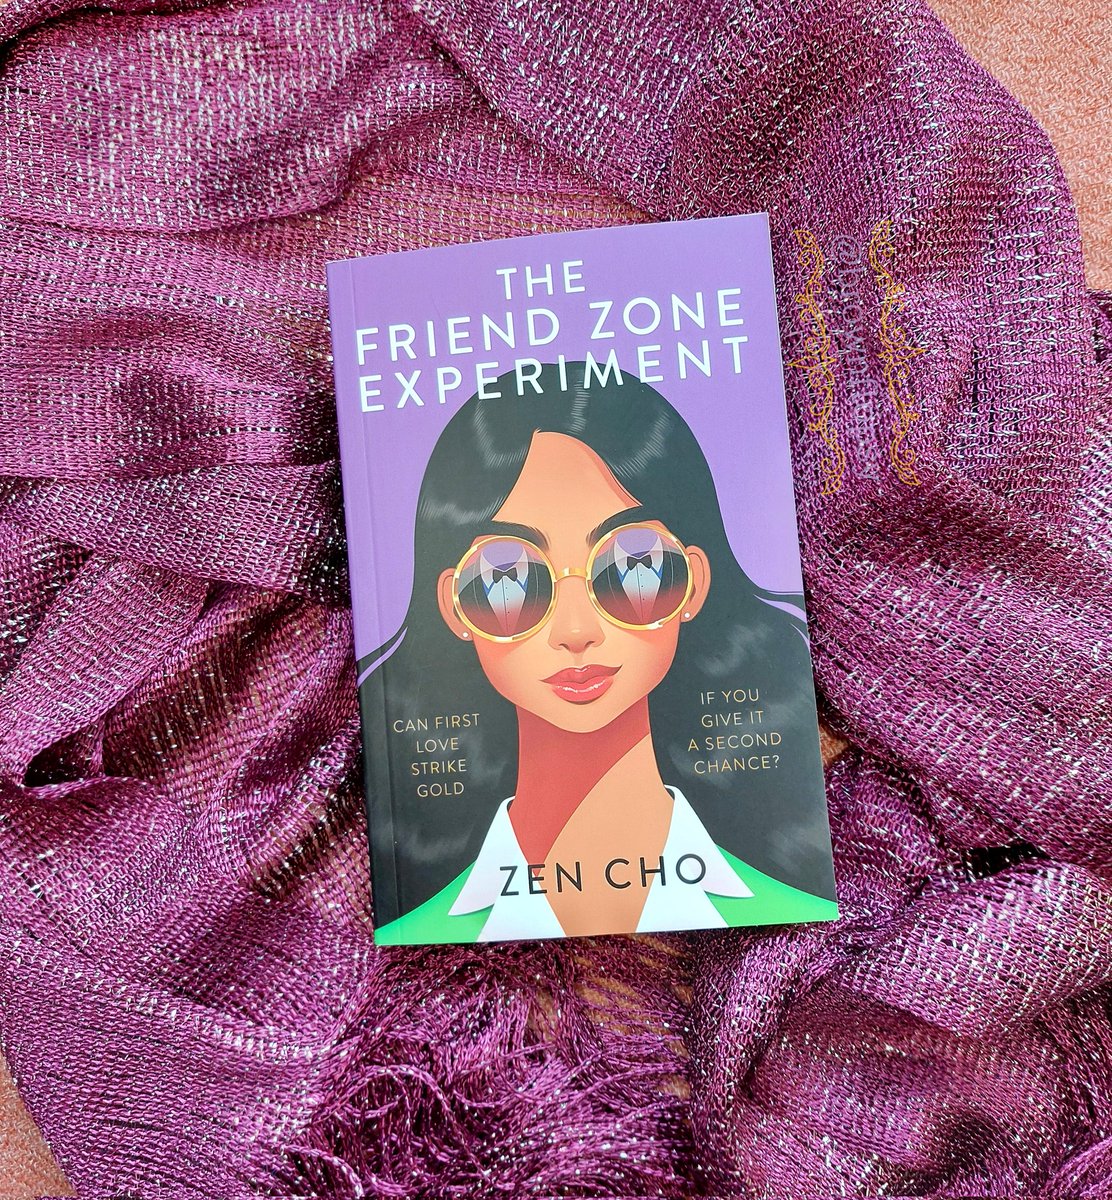 Thank you @chlodavies97 for this fab proof of #TheFriendZoneExperiment by @zenaldehyde which is out 8th August from @panmacmillan This little beauty will be part of the @Squadpod3 #SquadPodFeaturedBooks line-up in August, so stay tuned for our thoughts! 😁